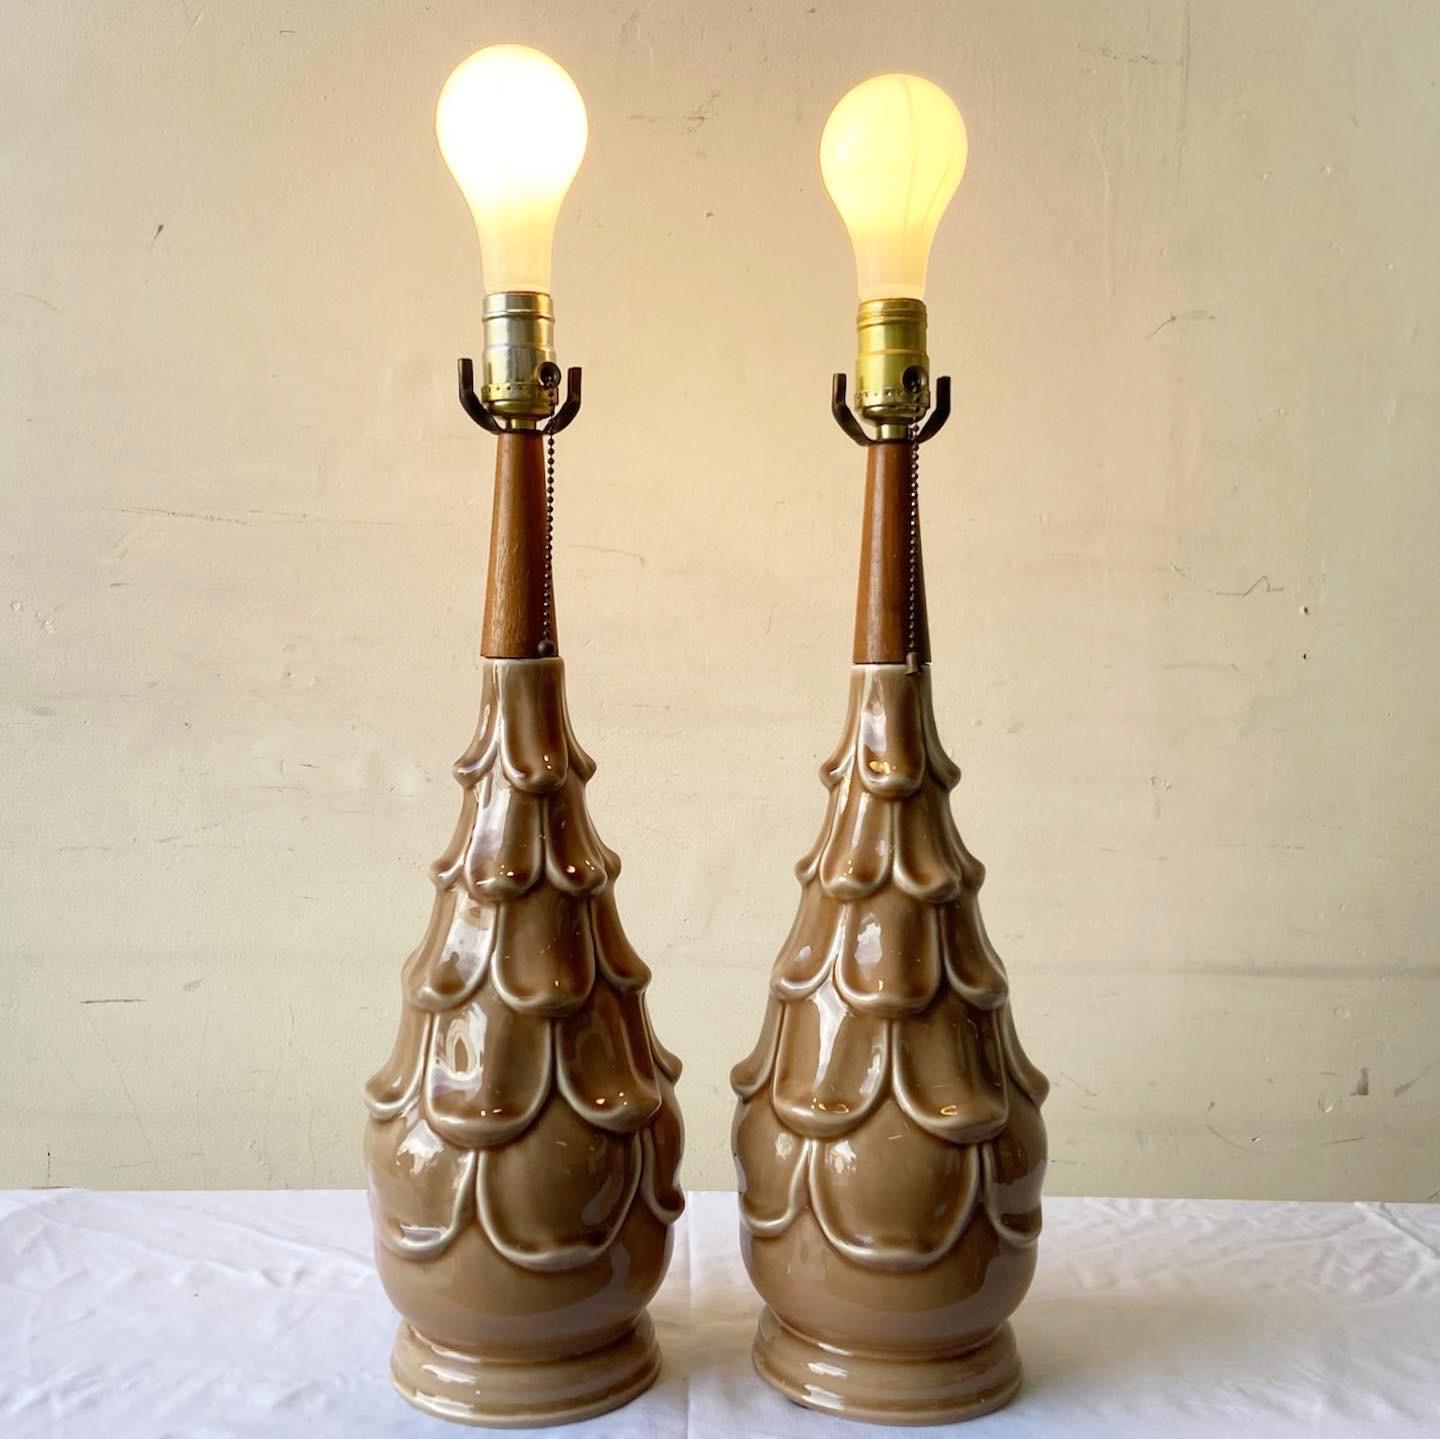 Amazing mid century modern pair of table lamps. Each feature a wooden neck with a sculpted brown ceramic body.
